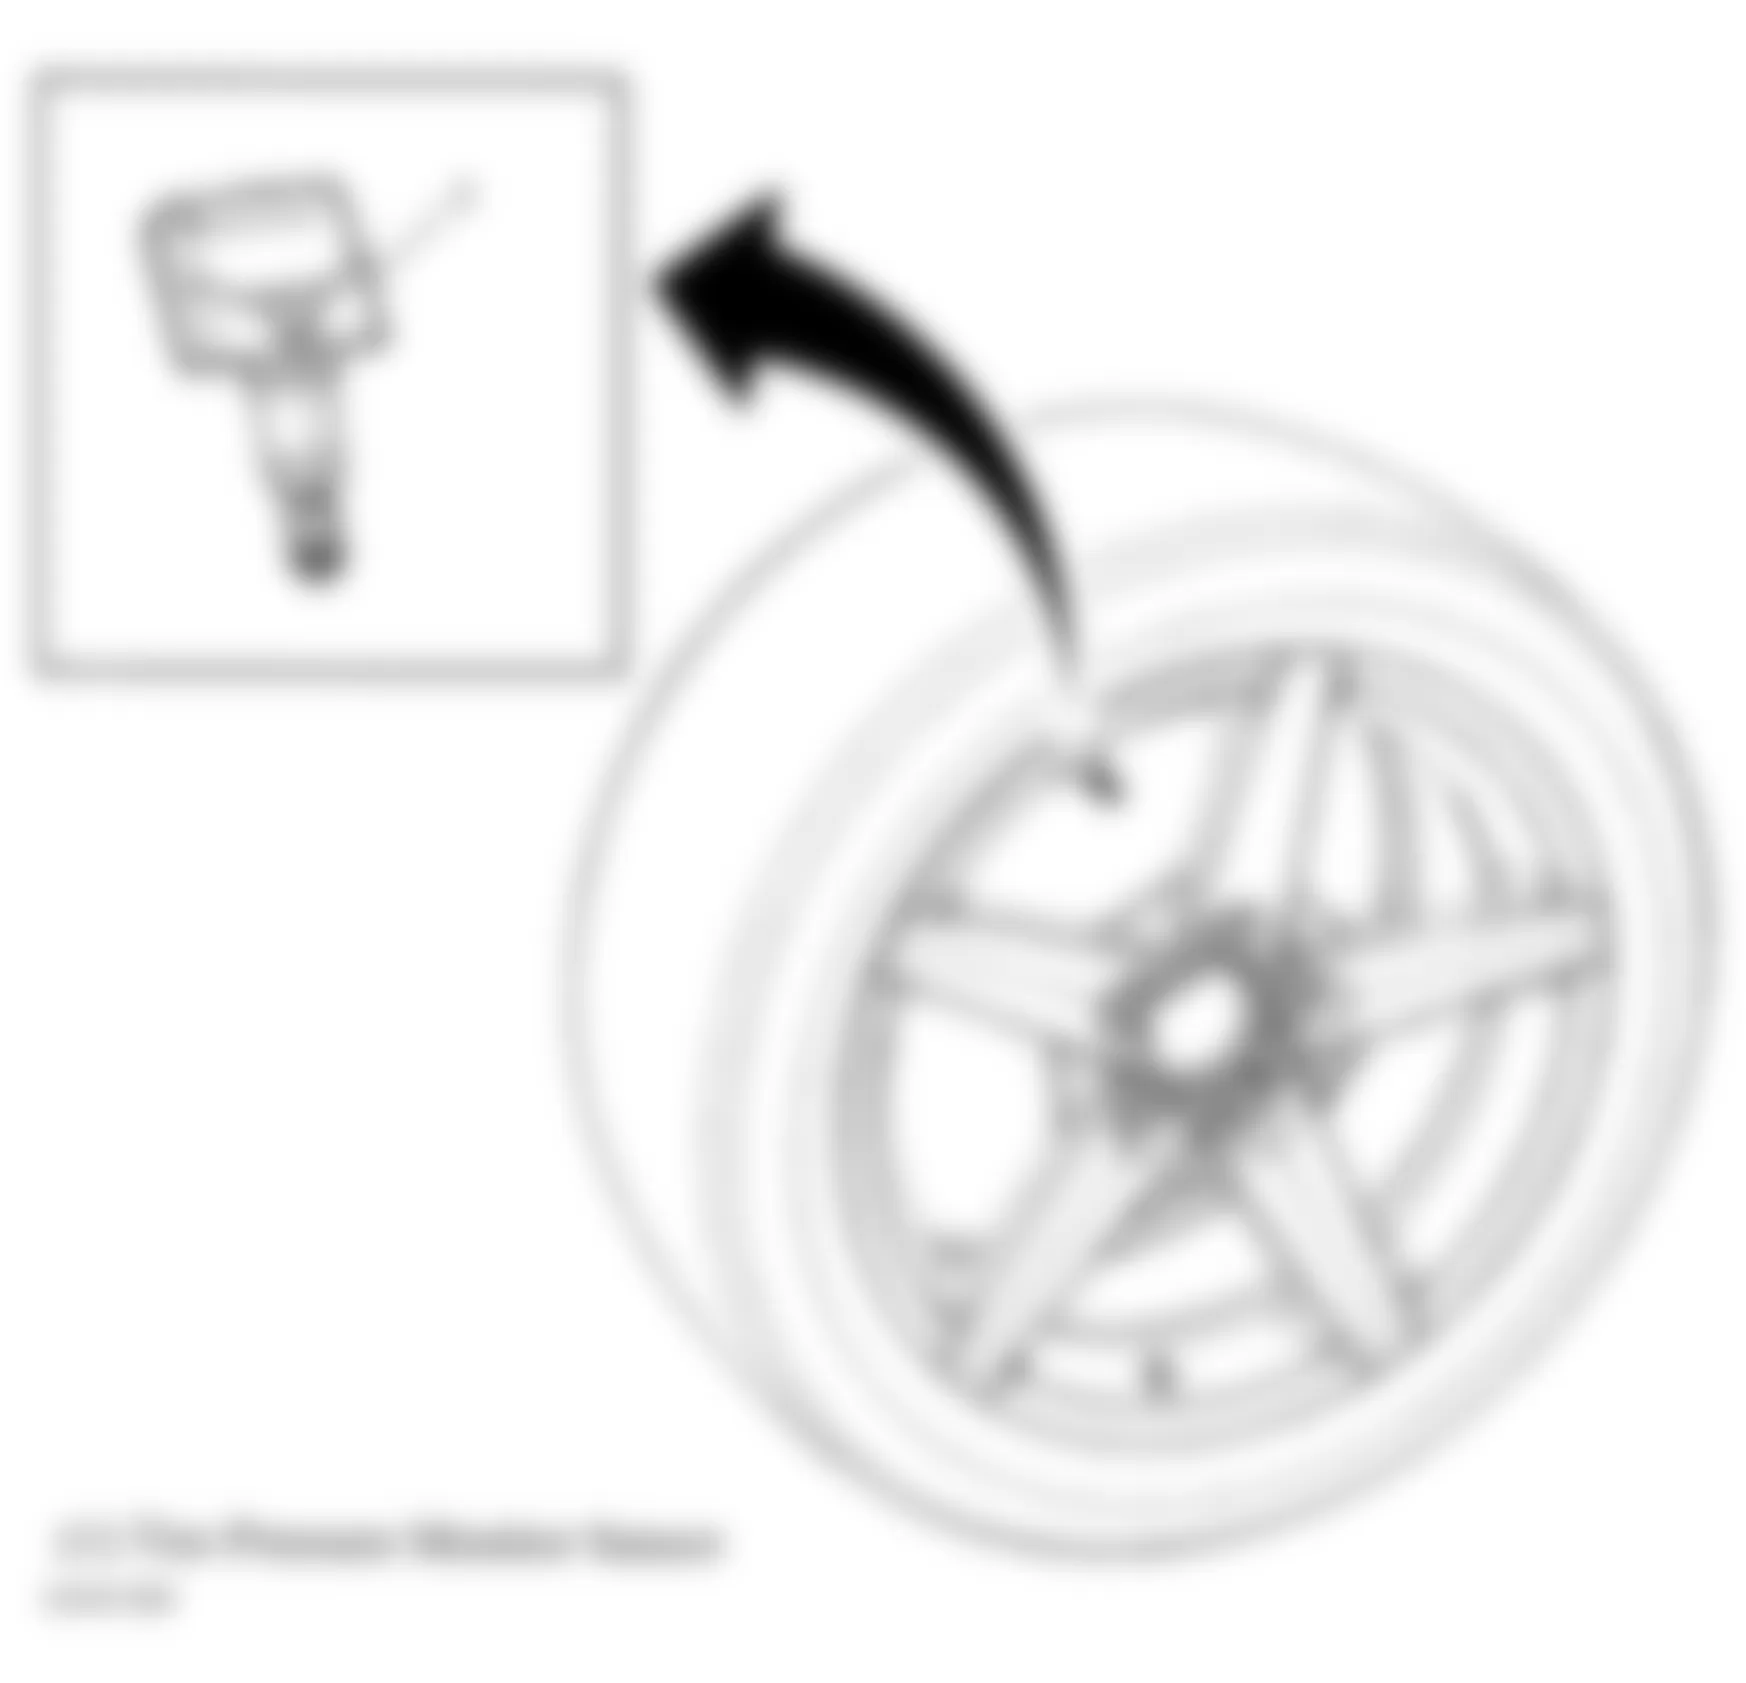 Chevrolet Impala LT 2010 - Component Locations -  Wheel Assembly